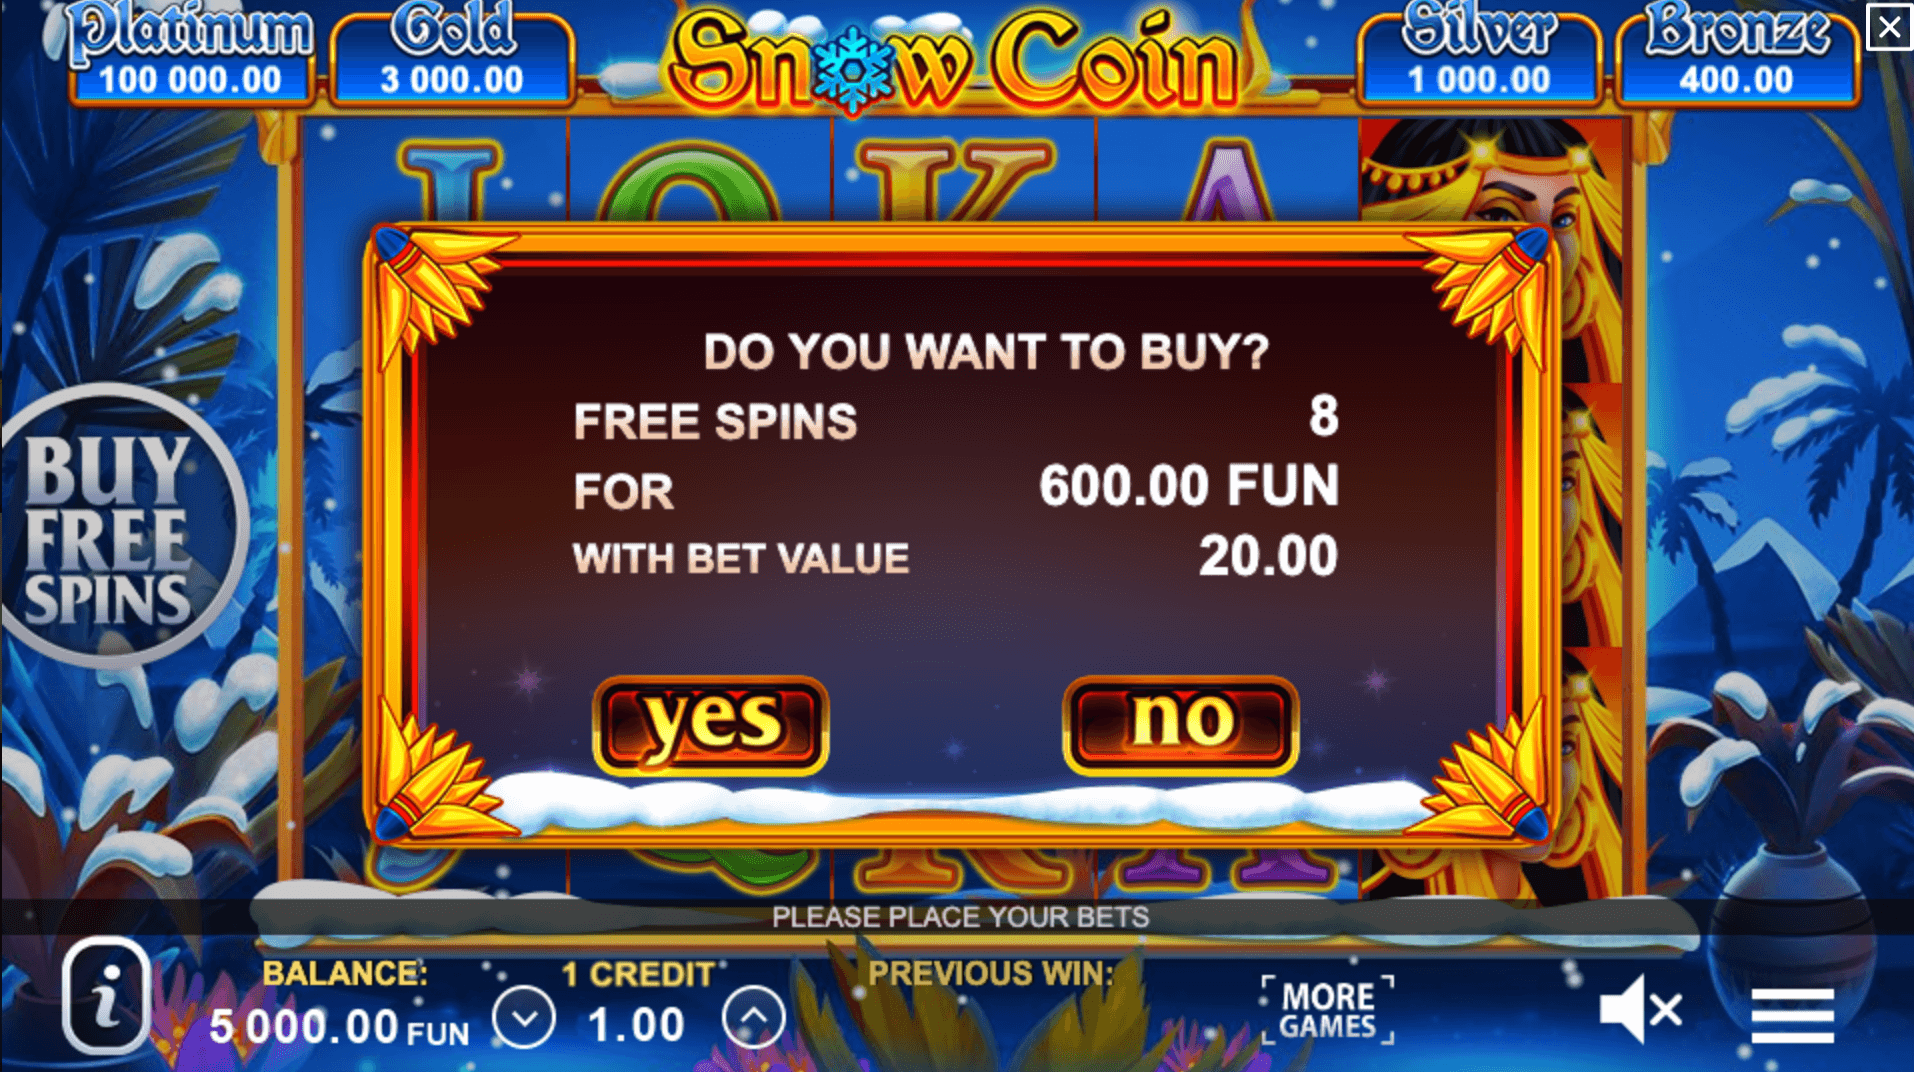 Snow Coin: Hold The Spin Game process